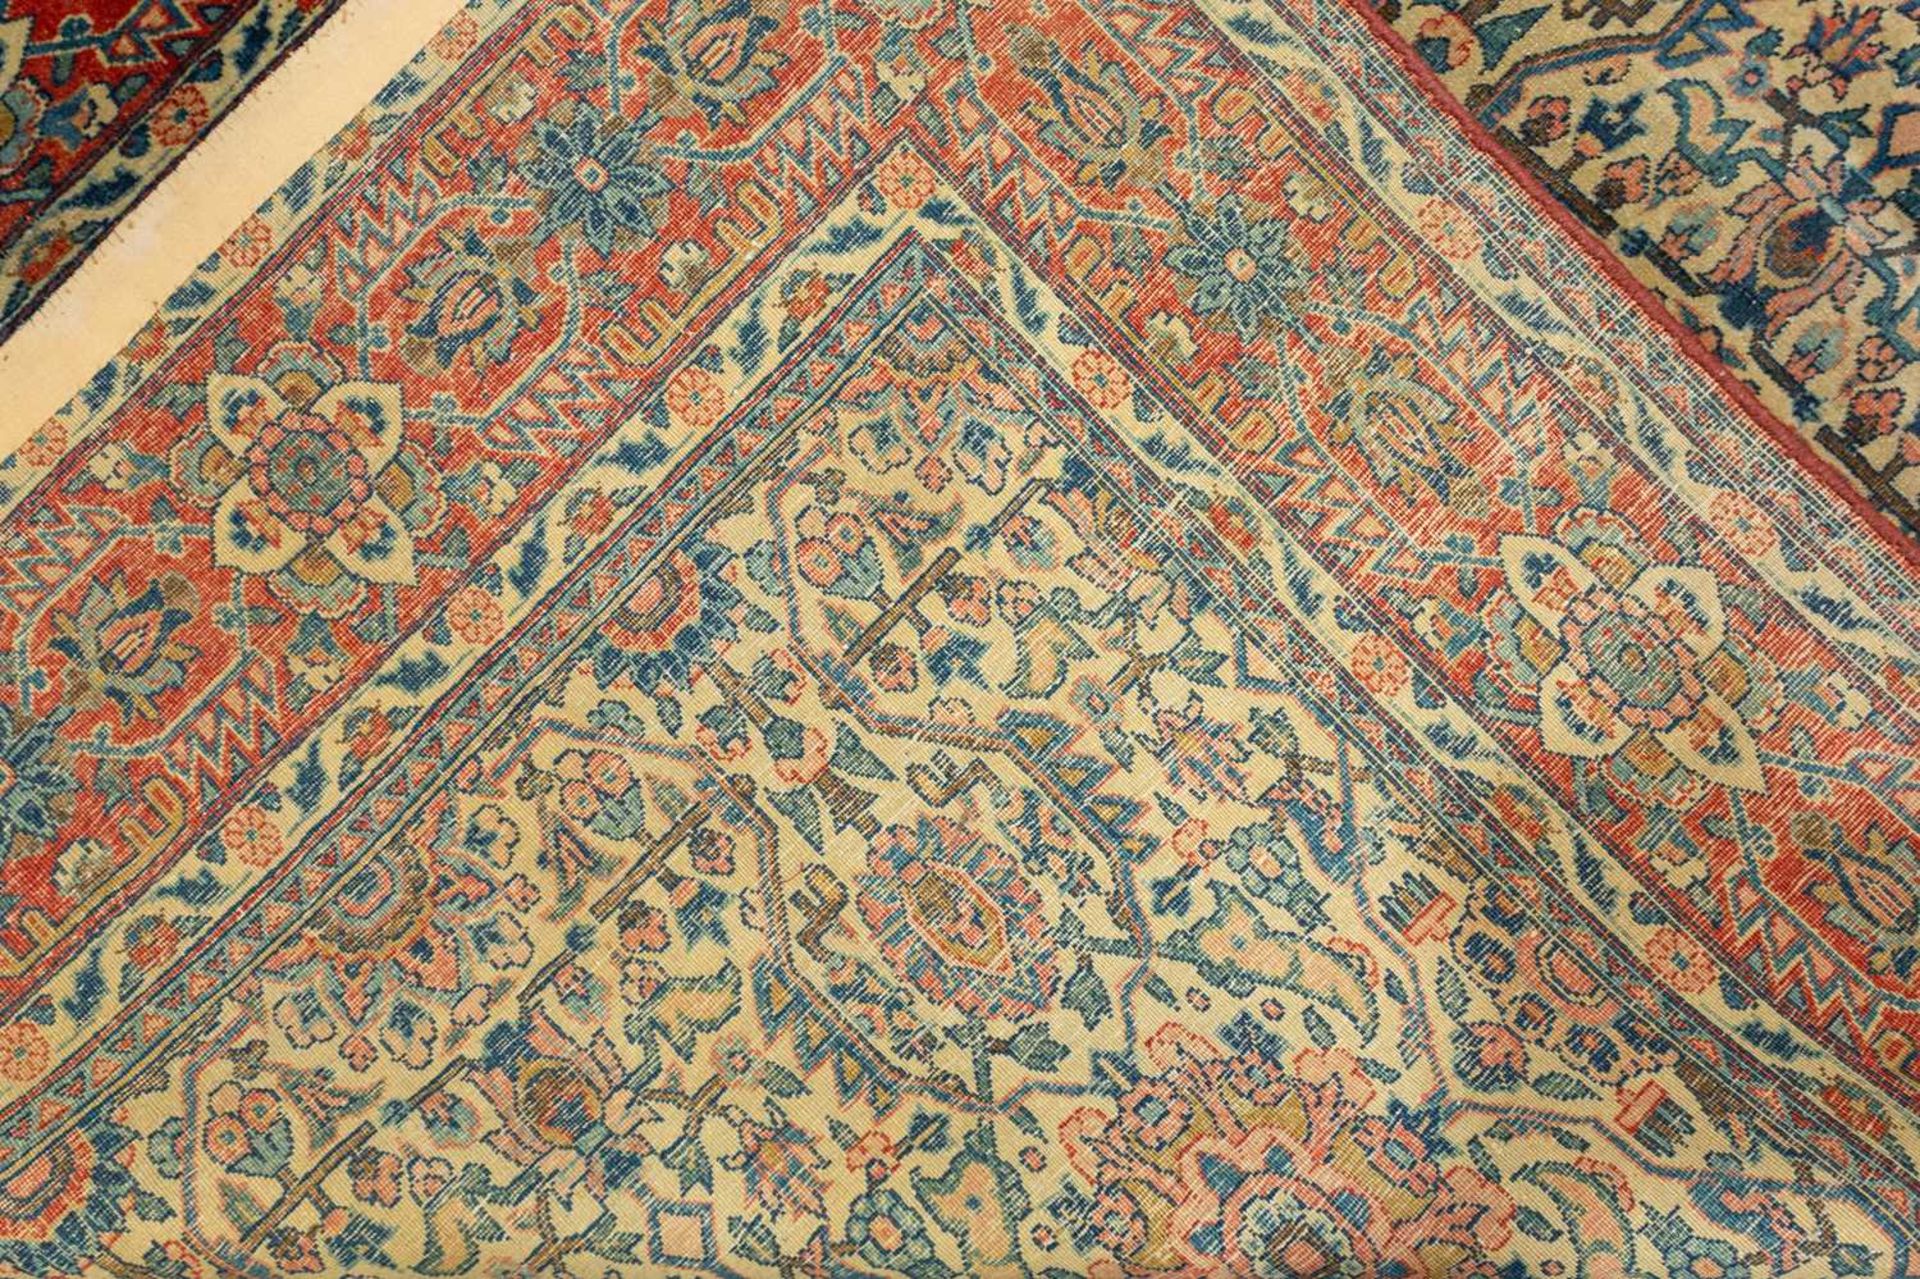 An antique ivory ground Kerman rug with an allover floral design within multiple borders 202 x 137cm - Image 2 of 10